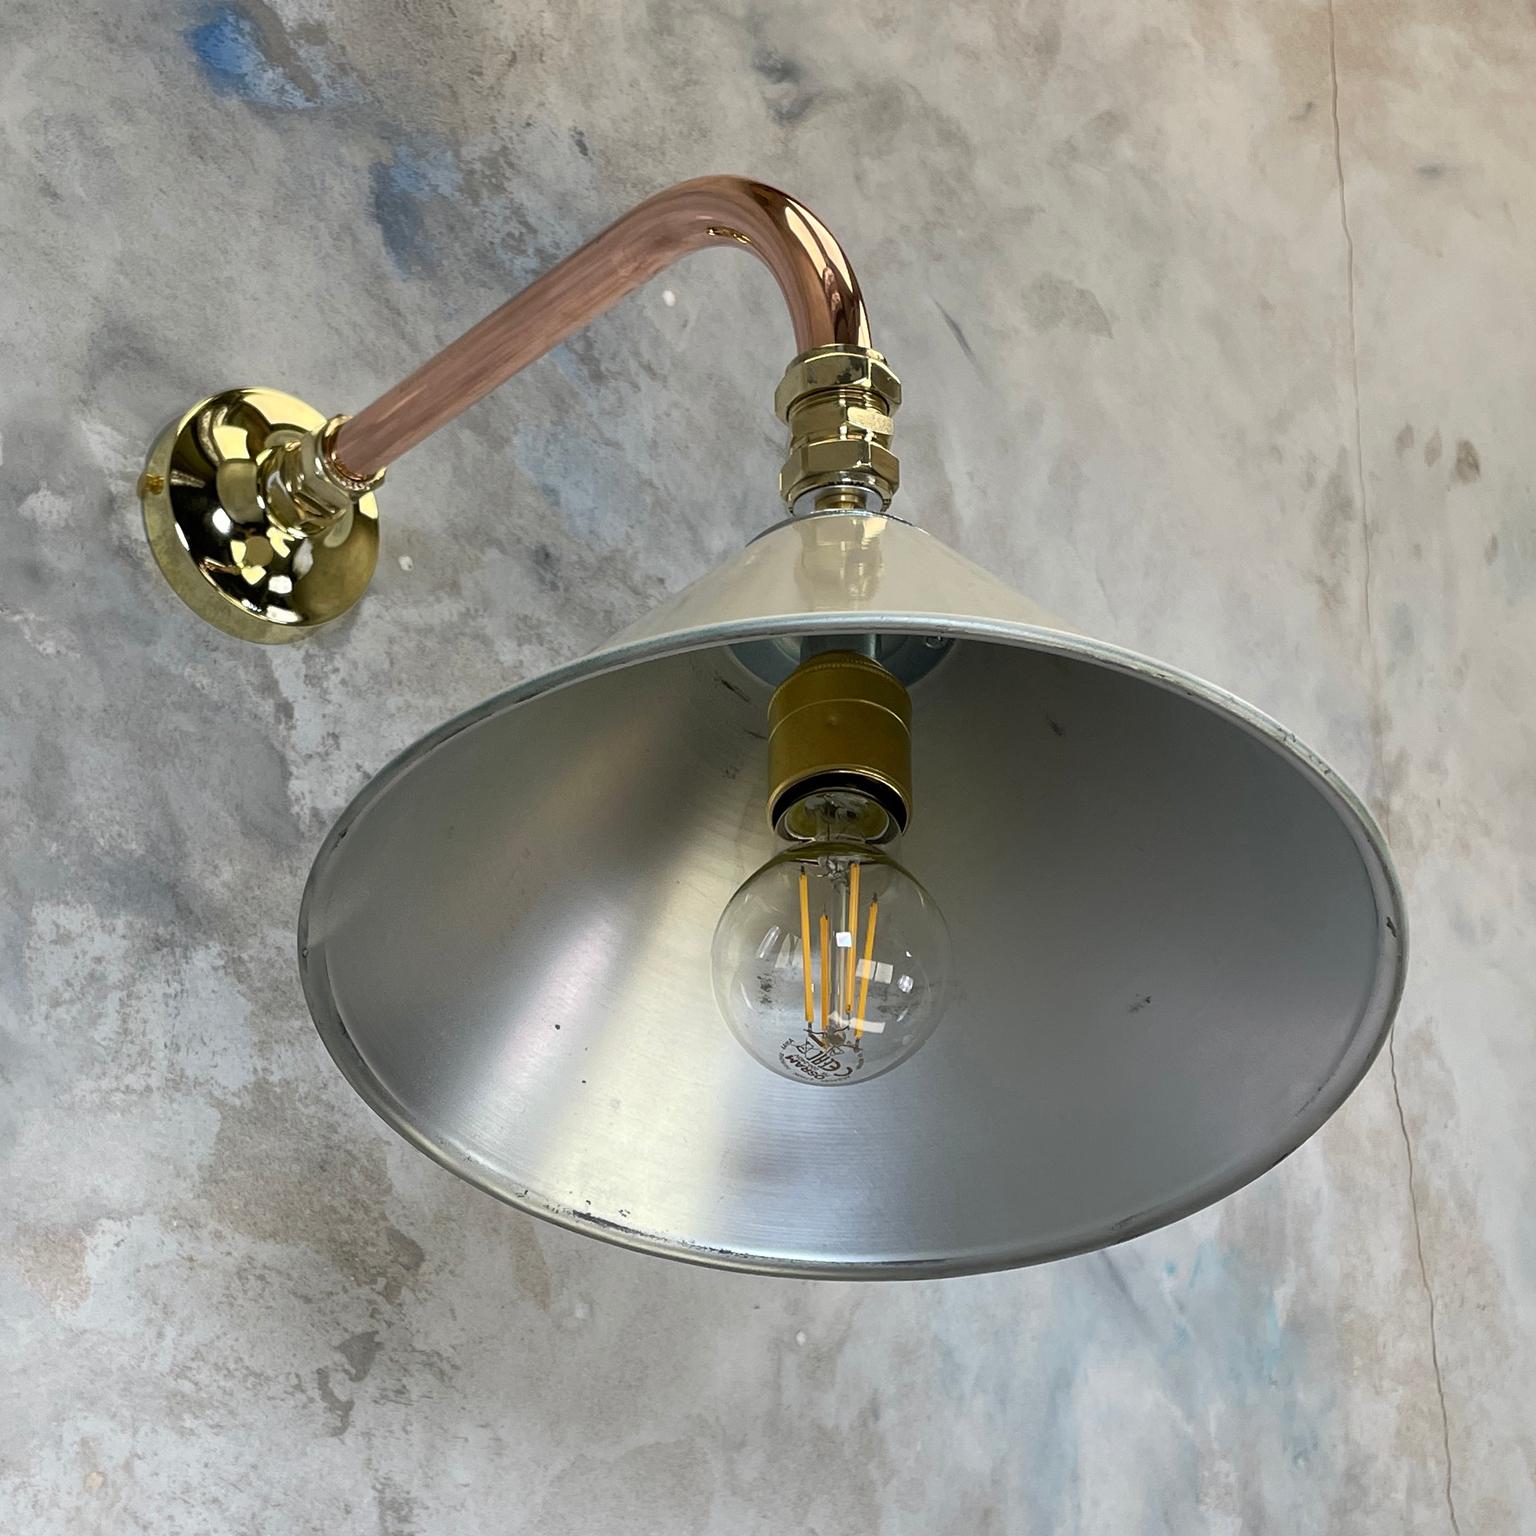 1980's Copper & Brass Cantilever Lamp Cream British Army Lamp Shade For Sale 10